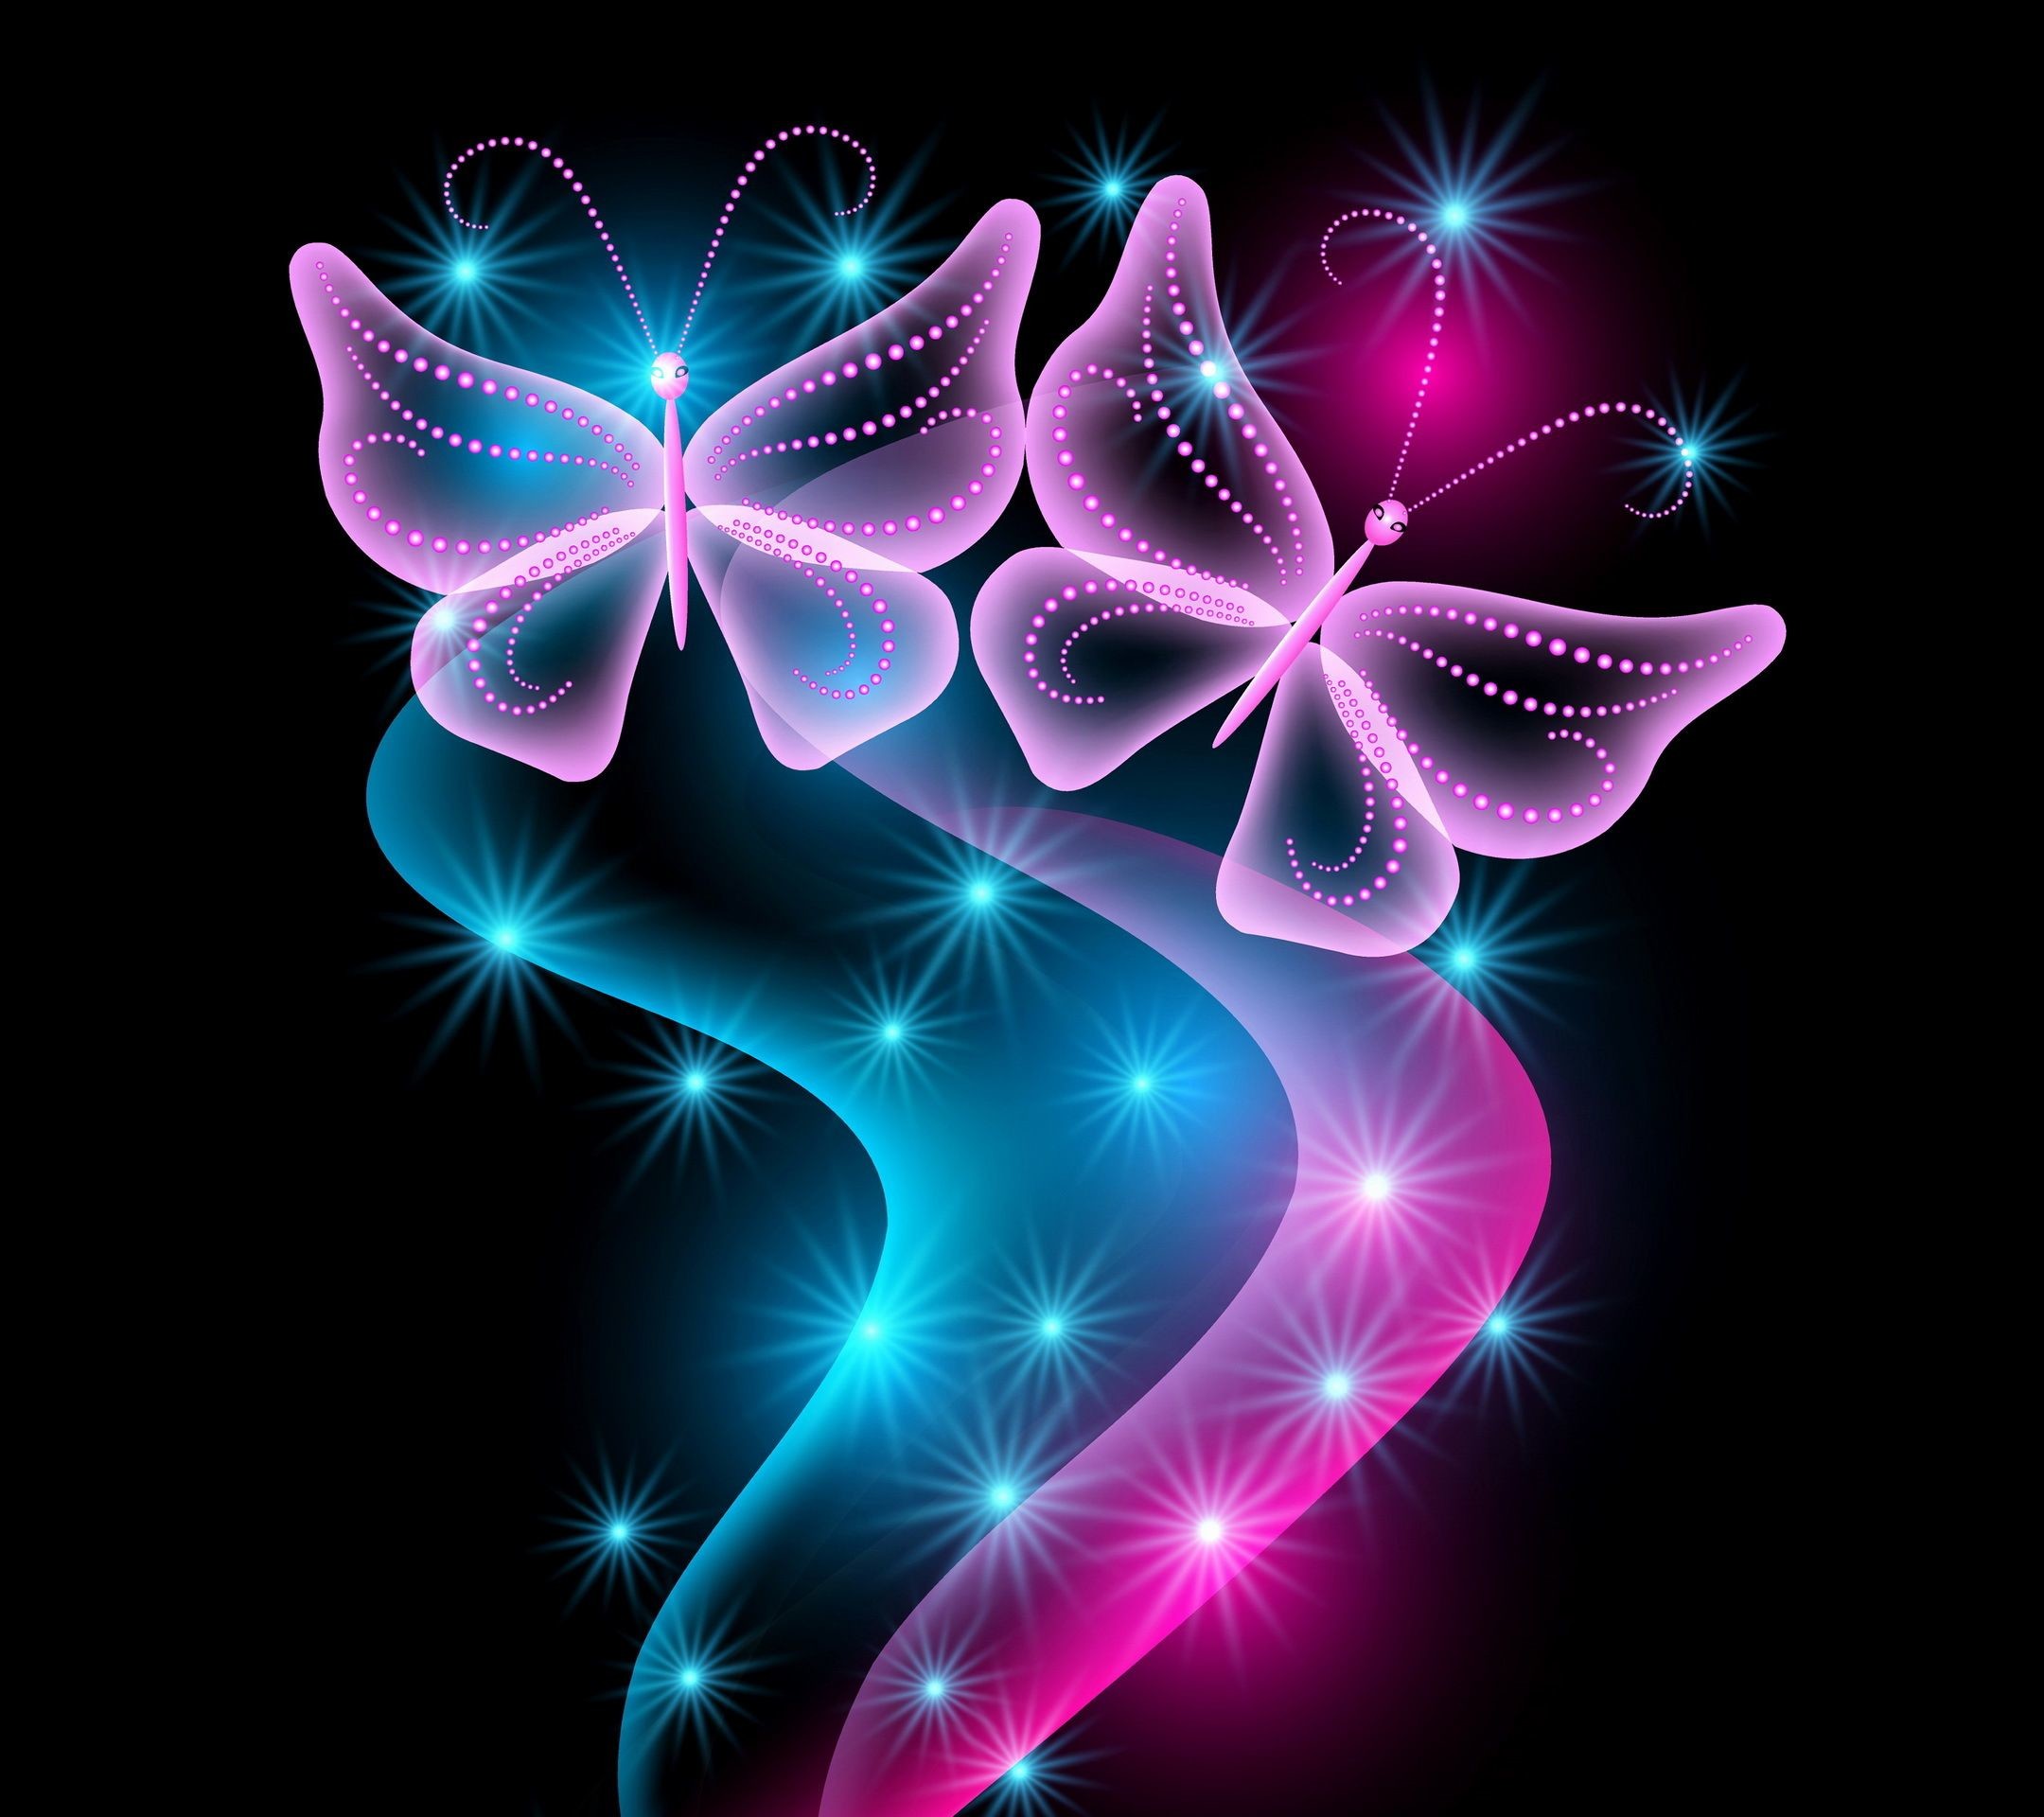 2160x1920, Free Butterfly Wallpaper For Kindle Fire - Whatsapp Dp Images  Butterfly - 2160x1920 Wallpaper 